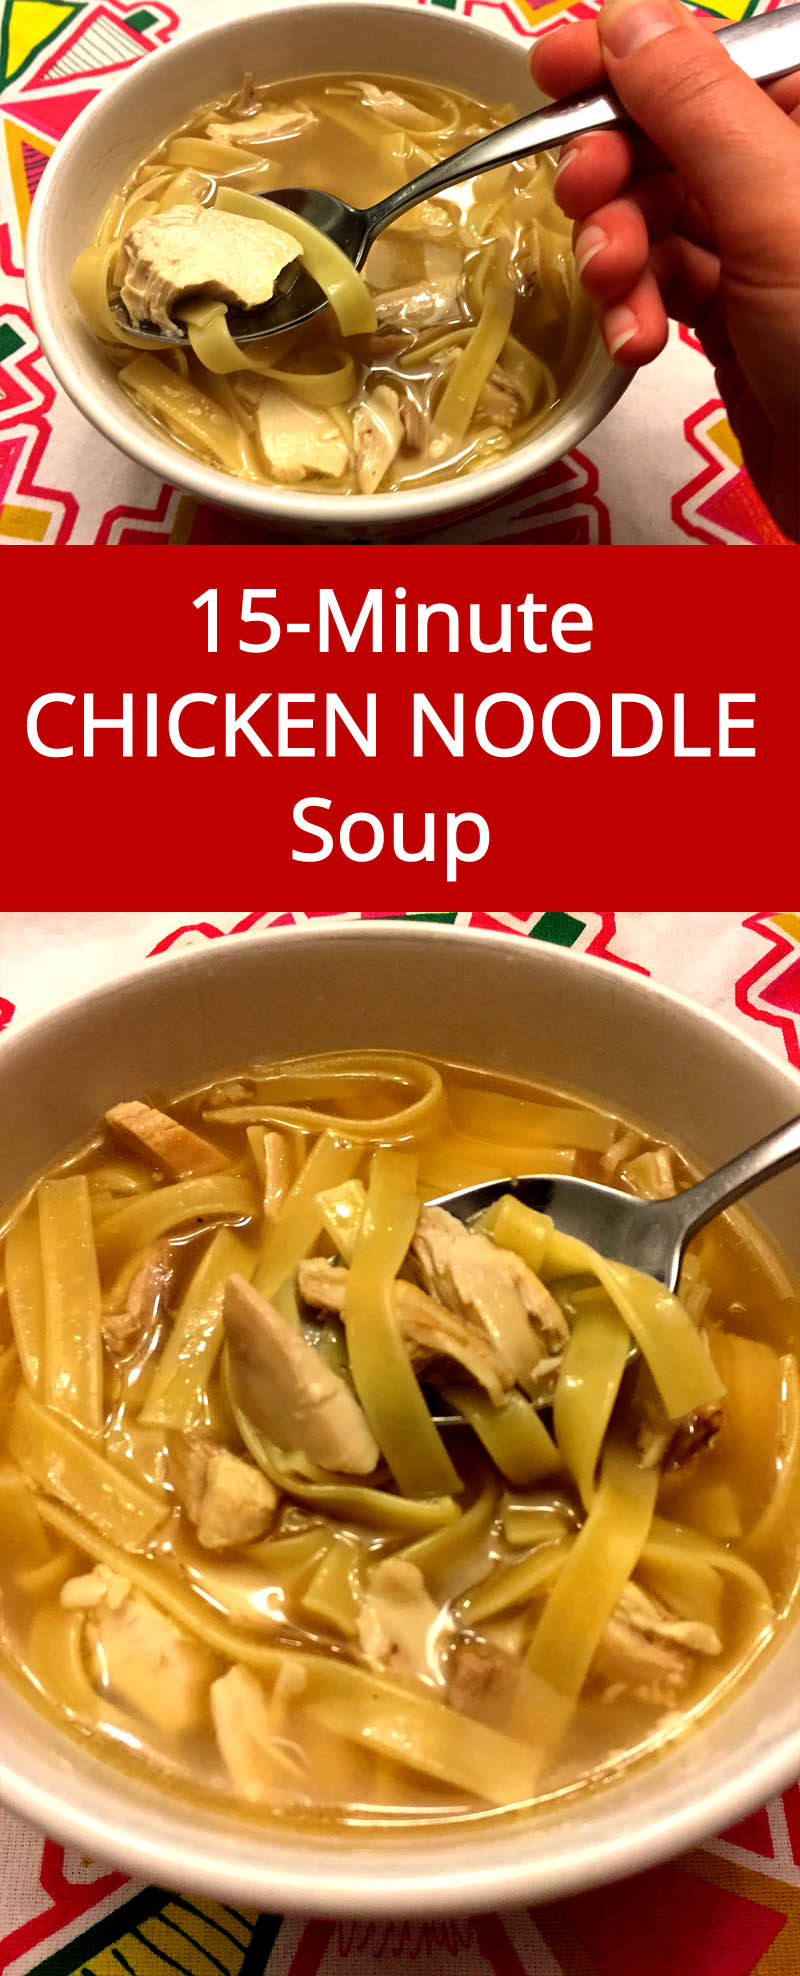 The Easiest Chicken Noodle Soup Recipe Ever - ready in 15 minutes, so delicious! | MelanieCooks.com